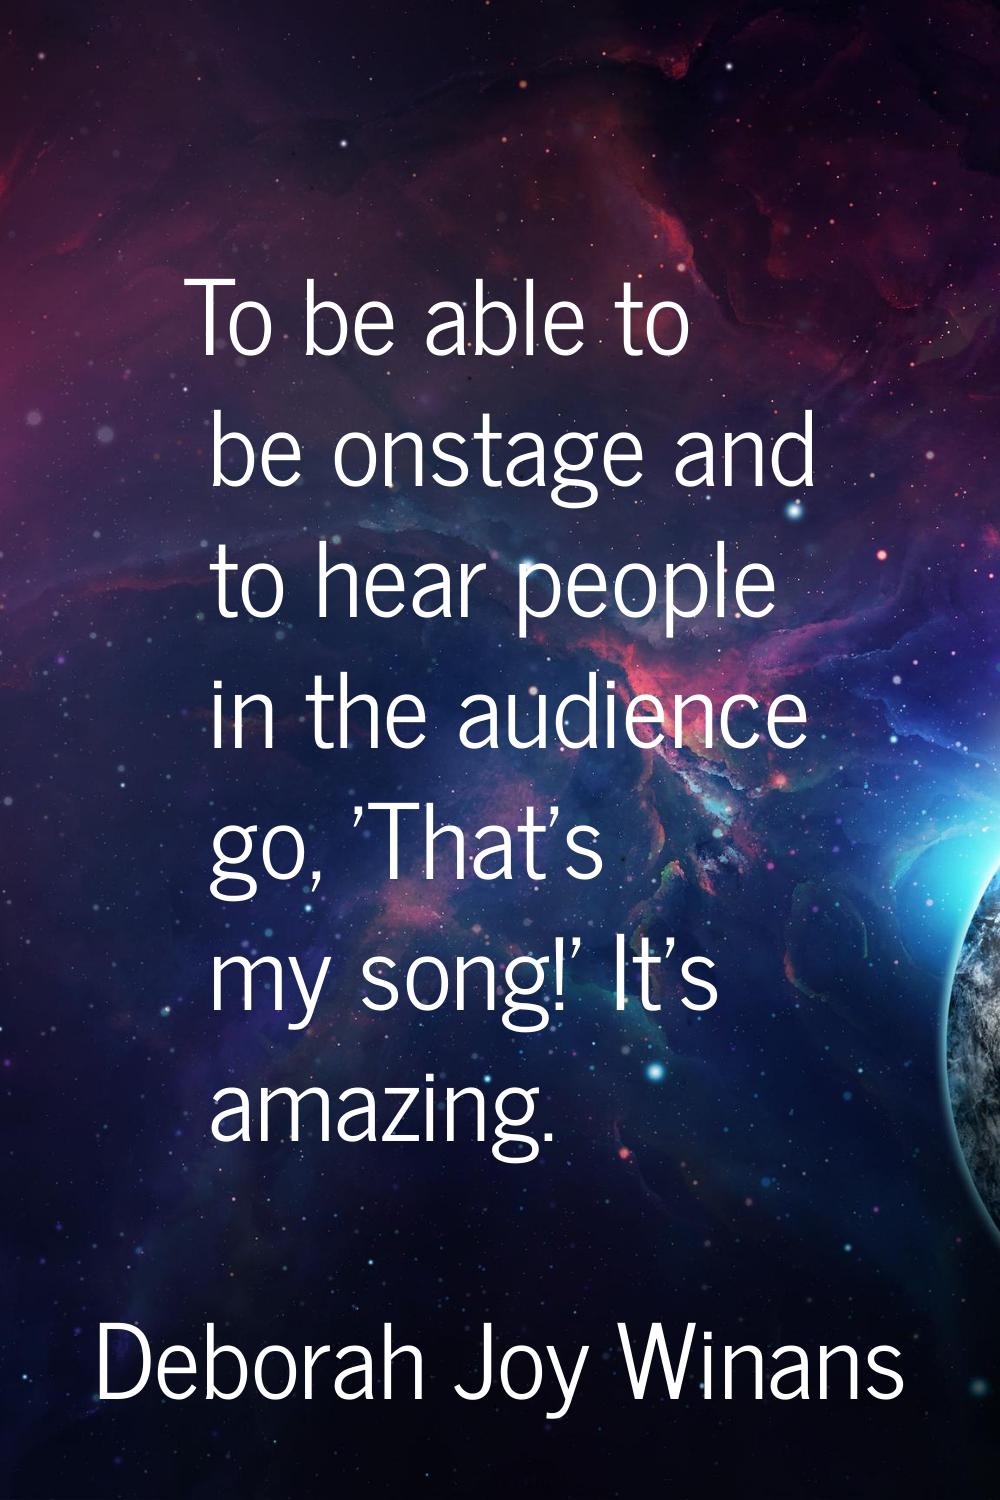 To be able to be onstage and to hear people in the audience go, 'That's my song!' It's amazing.